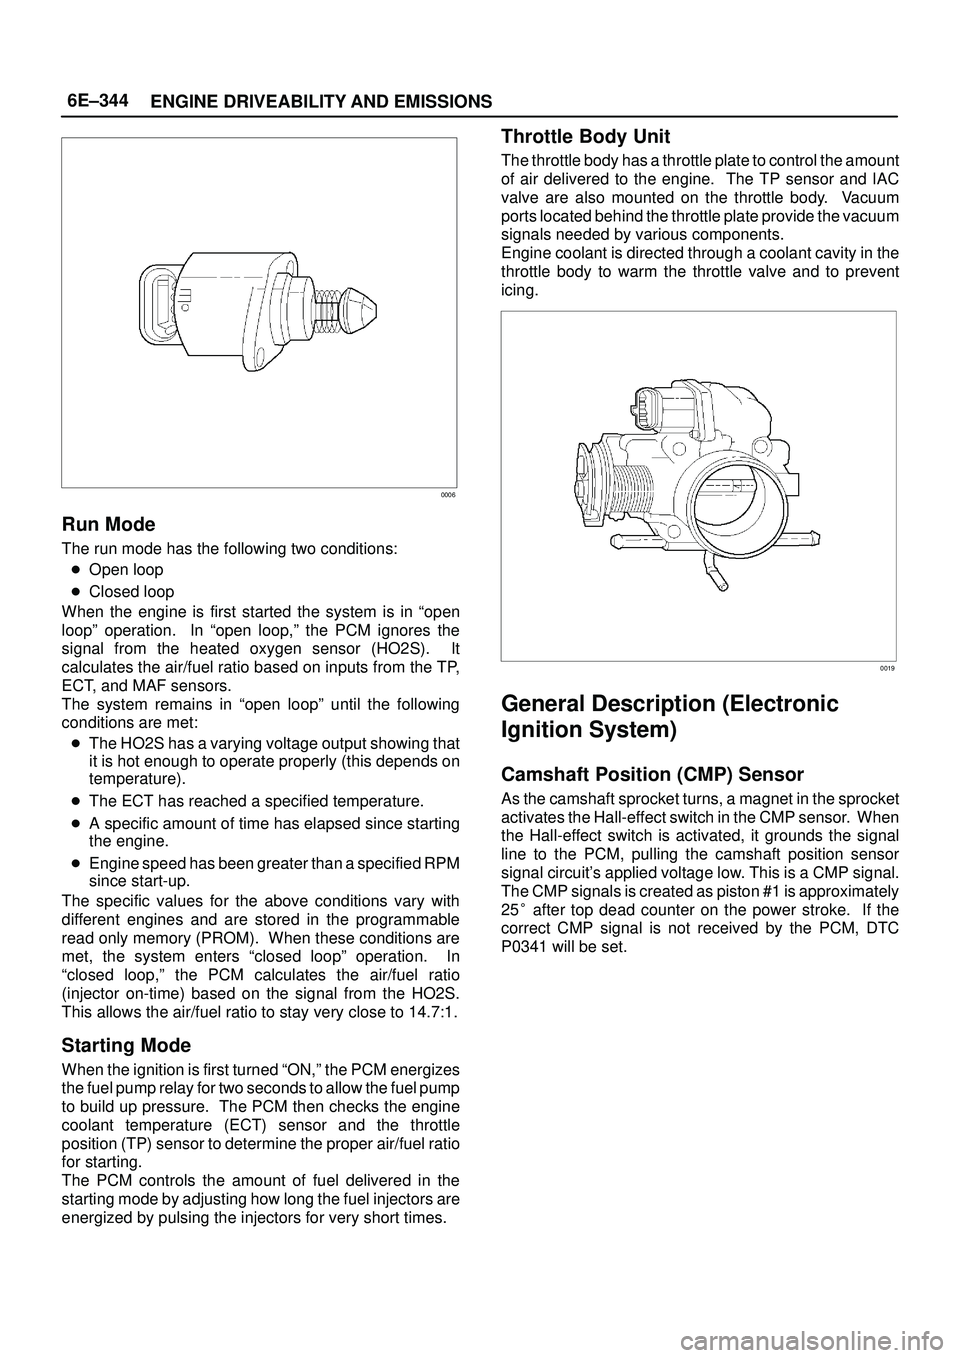 ISUZU TROOPER 1998  Service Service Manual 6E±344
ENGINE DRIVEABILITY AND EMISSIONS
0006
Run Mode
The run mode has the following two conditions:
Open loop
Closed loop
When the engine is first started the system is in ªopen
loopº operation